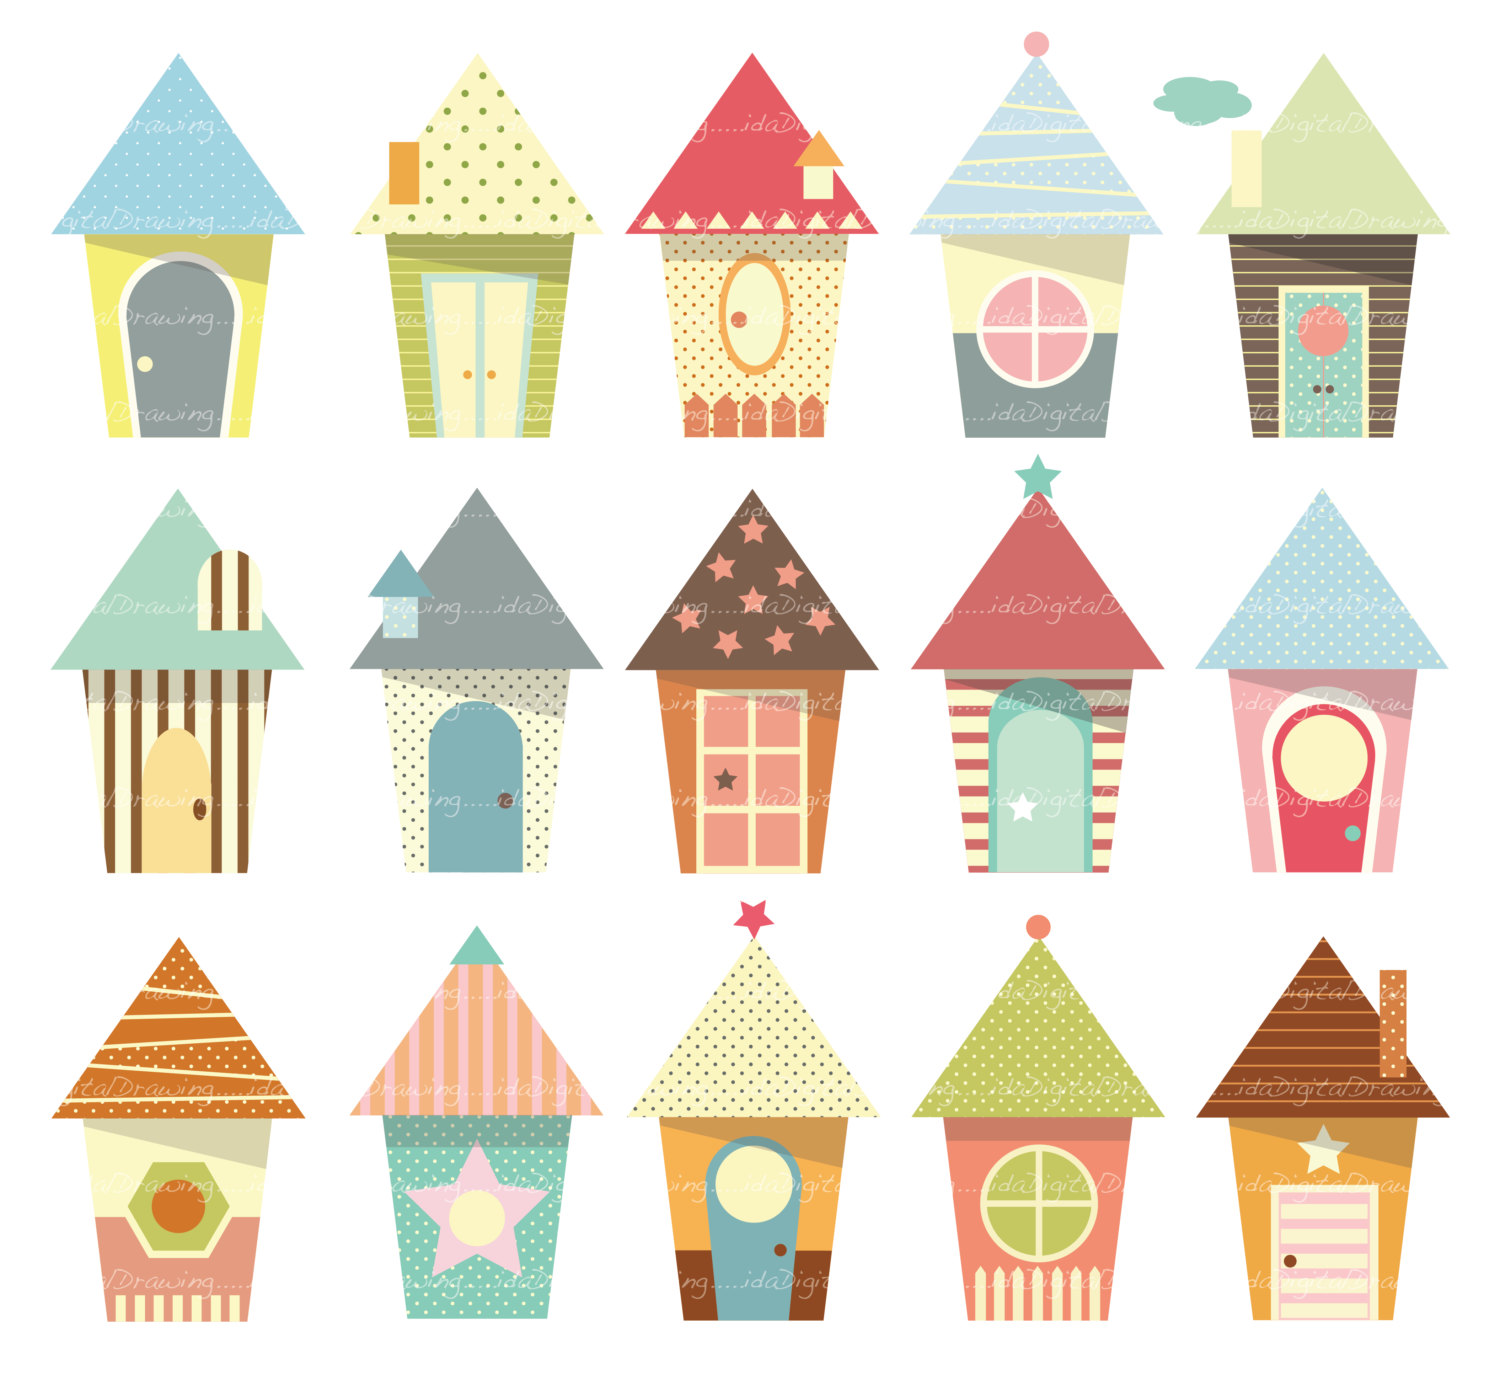 Baby Houses Clip Art High Resolution By Idadrawing On Etsy